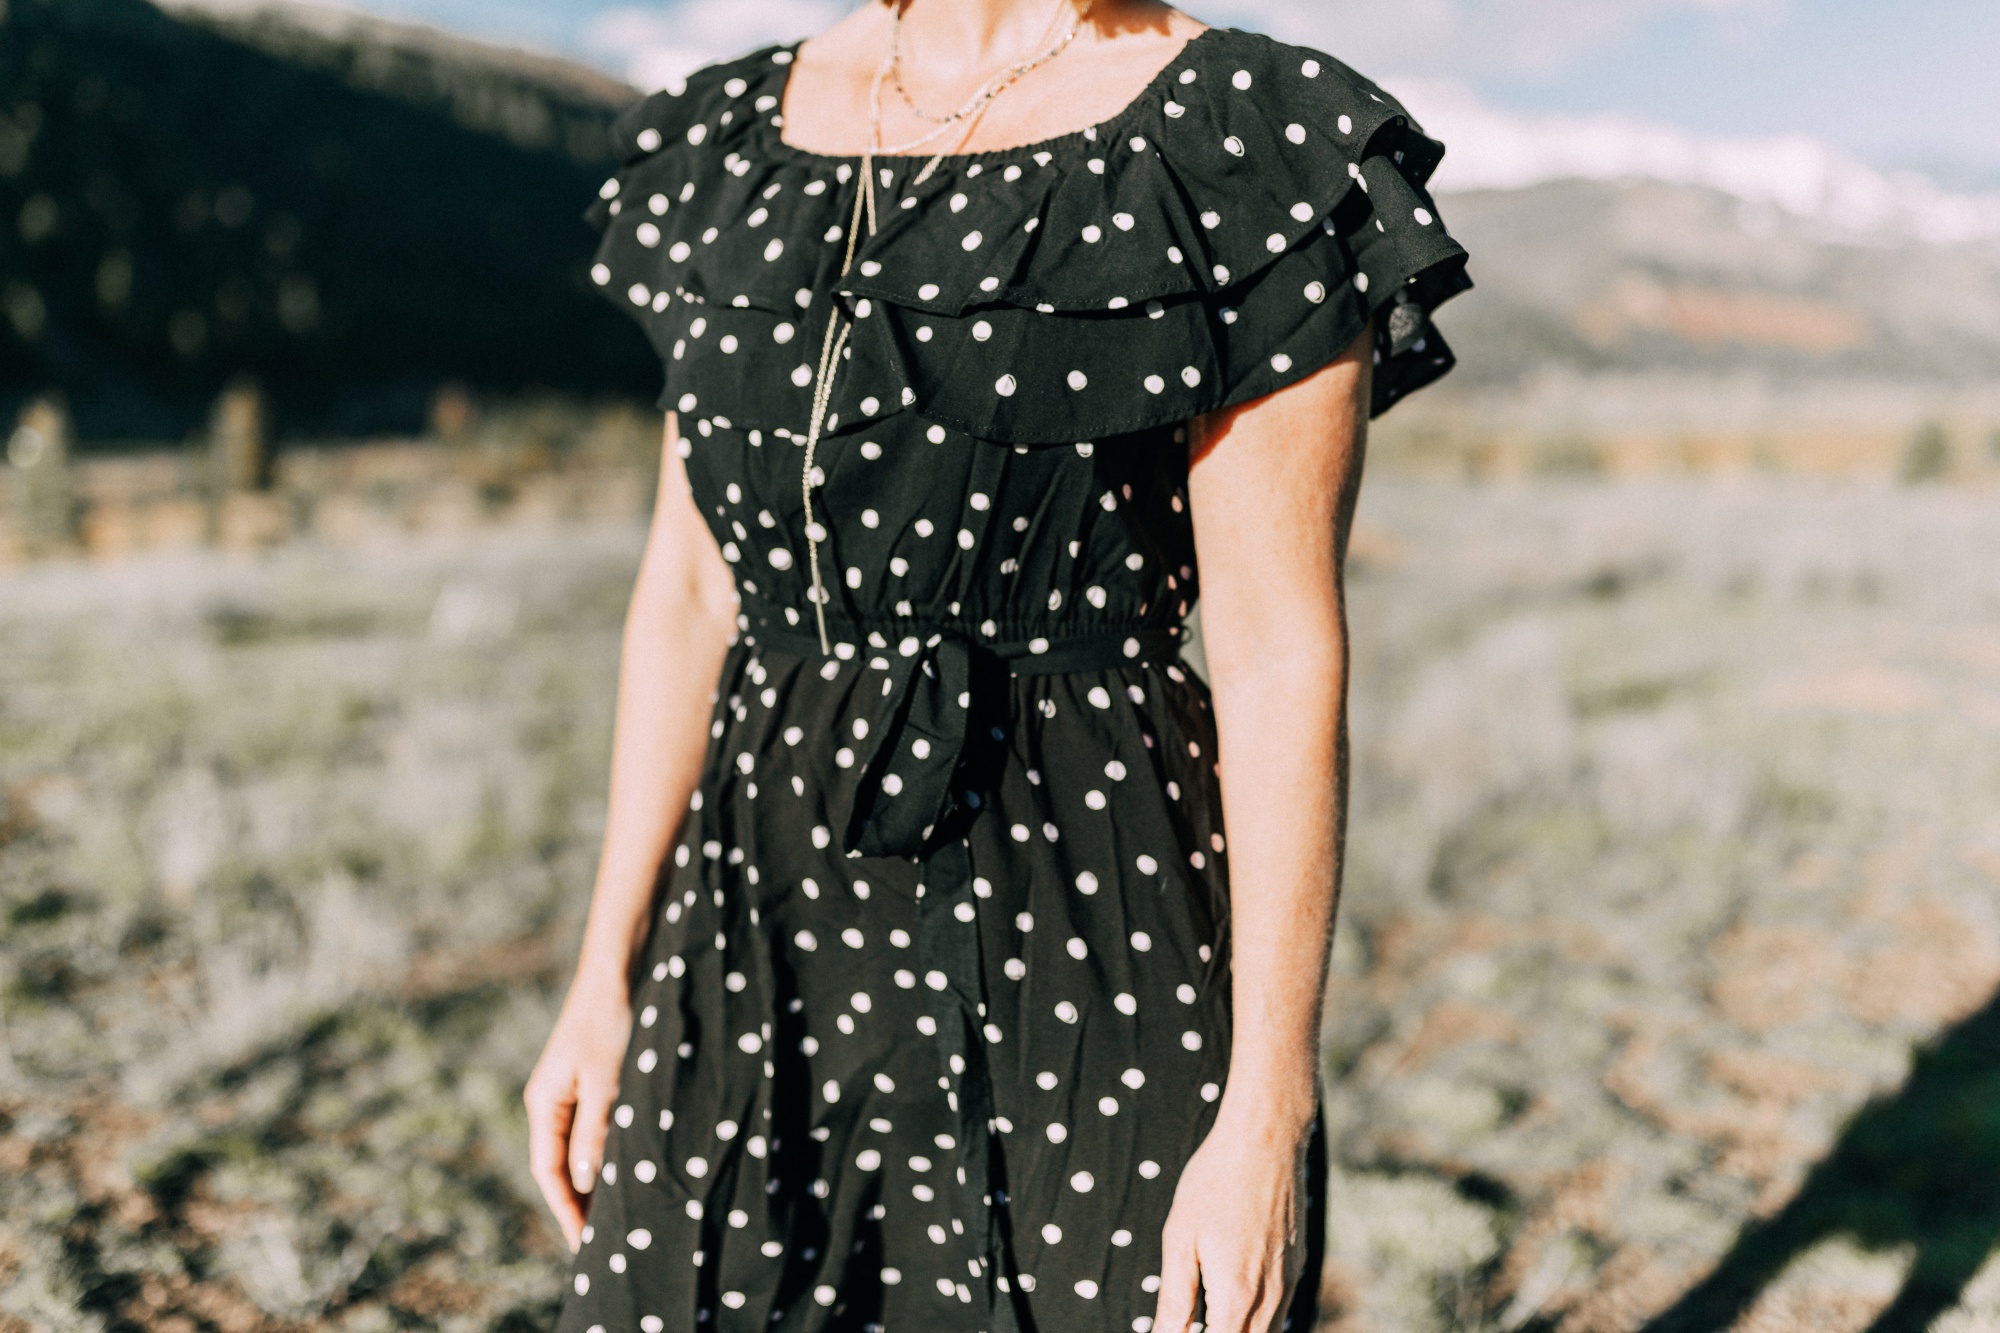 Polka Dot Dresses from JCPenney on fashion blogger Erin Busbee of Busbee Style